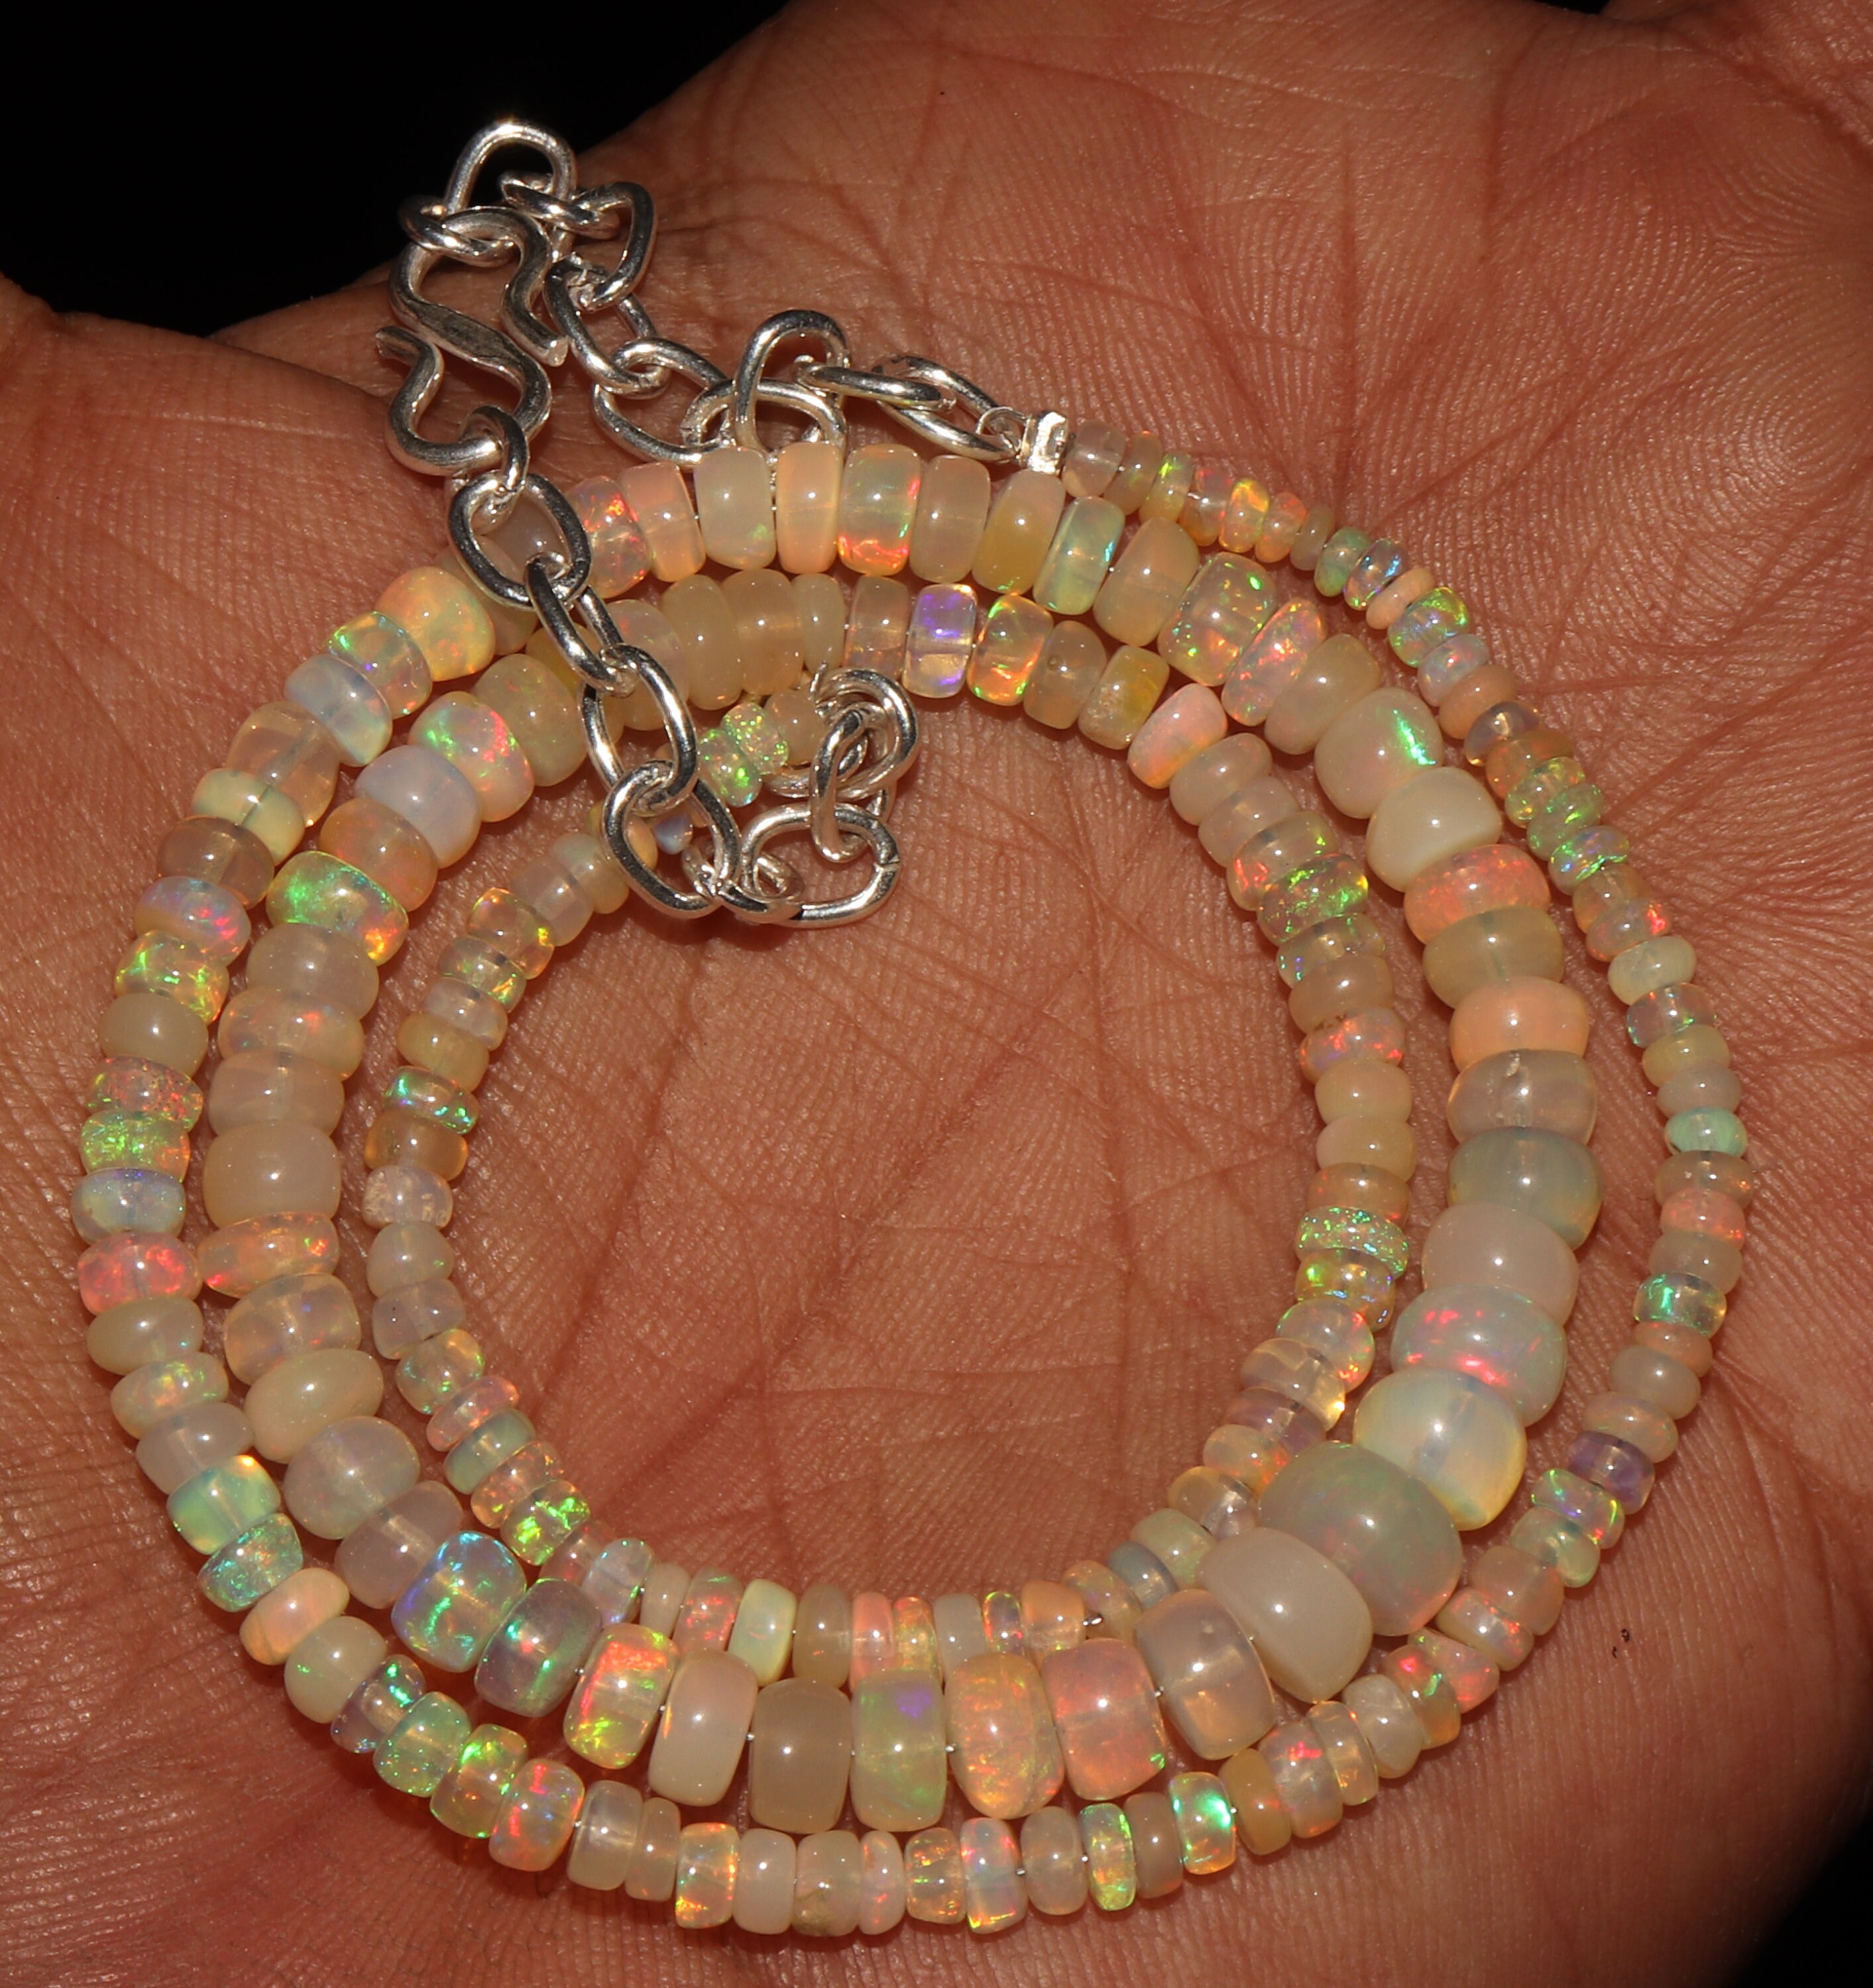 100% Natural Ethiopian Welo Fire Opal  Roundel Beads Necklace \  strand Chain. 